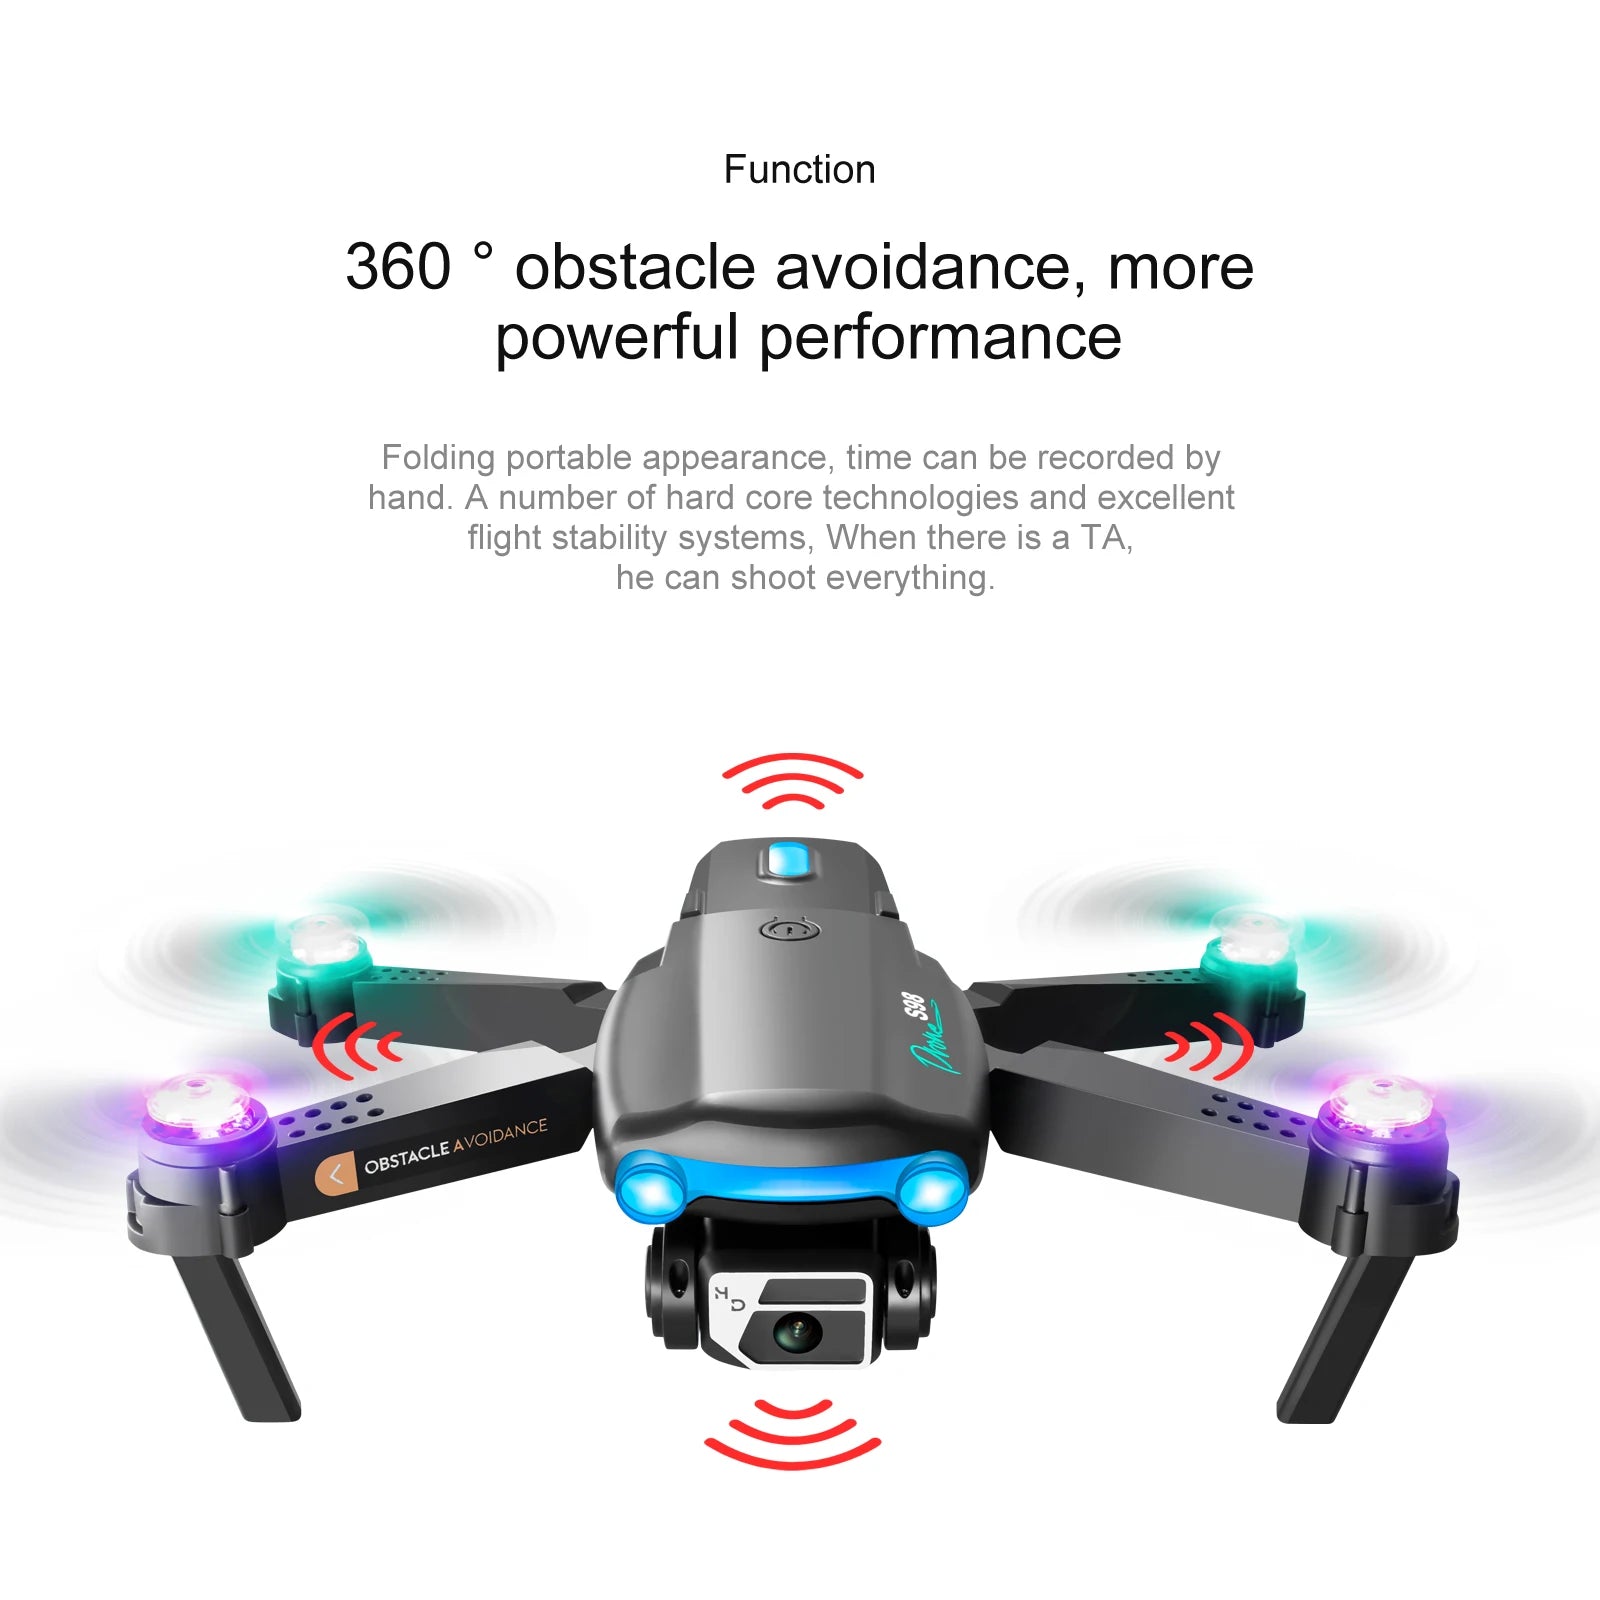 S98  Drone, function 360 obstacle avoidance, more powerful performance folding portable appearance .